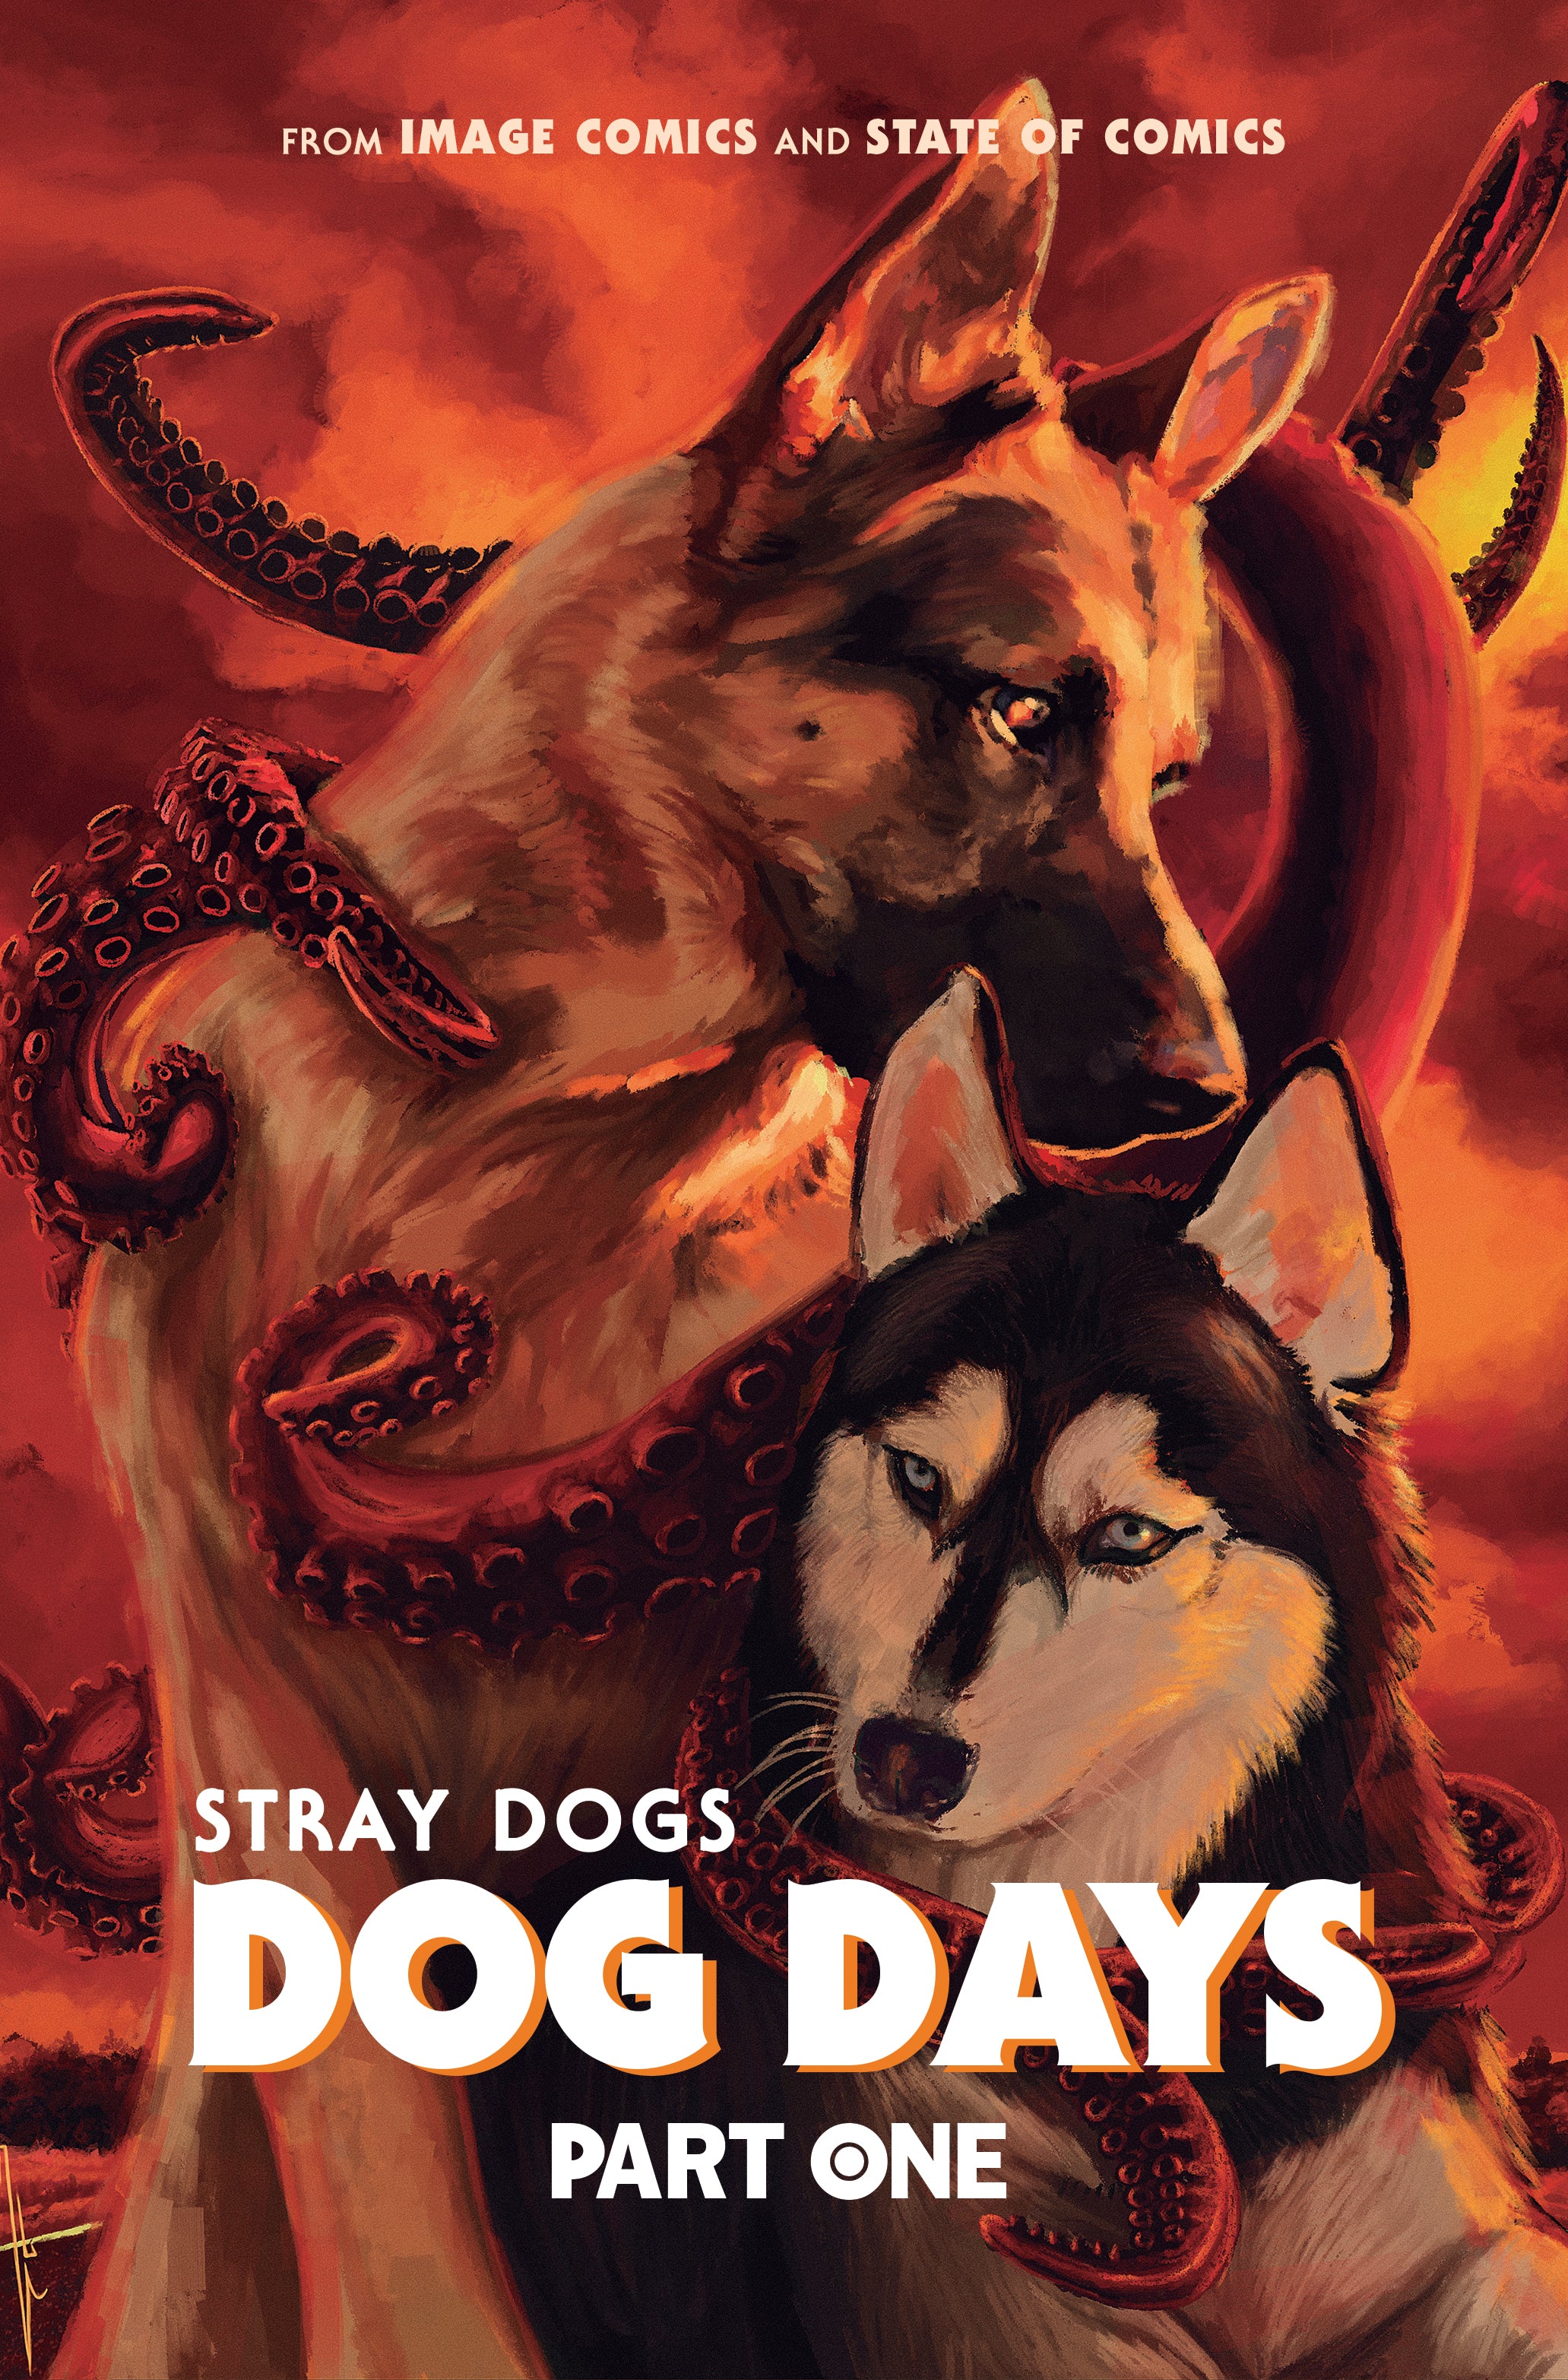 Stray Dogs Dog Days #1 Ingrid Gala Homage Exclusive Cover - State of Comics